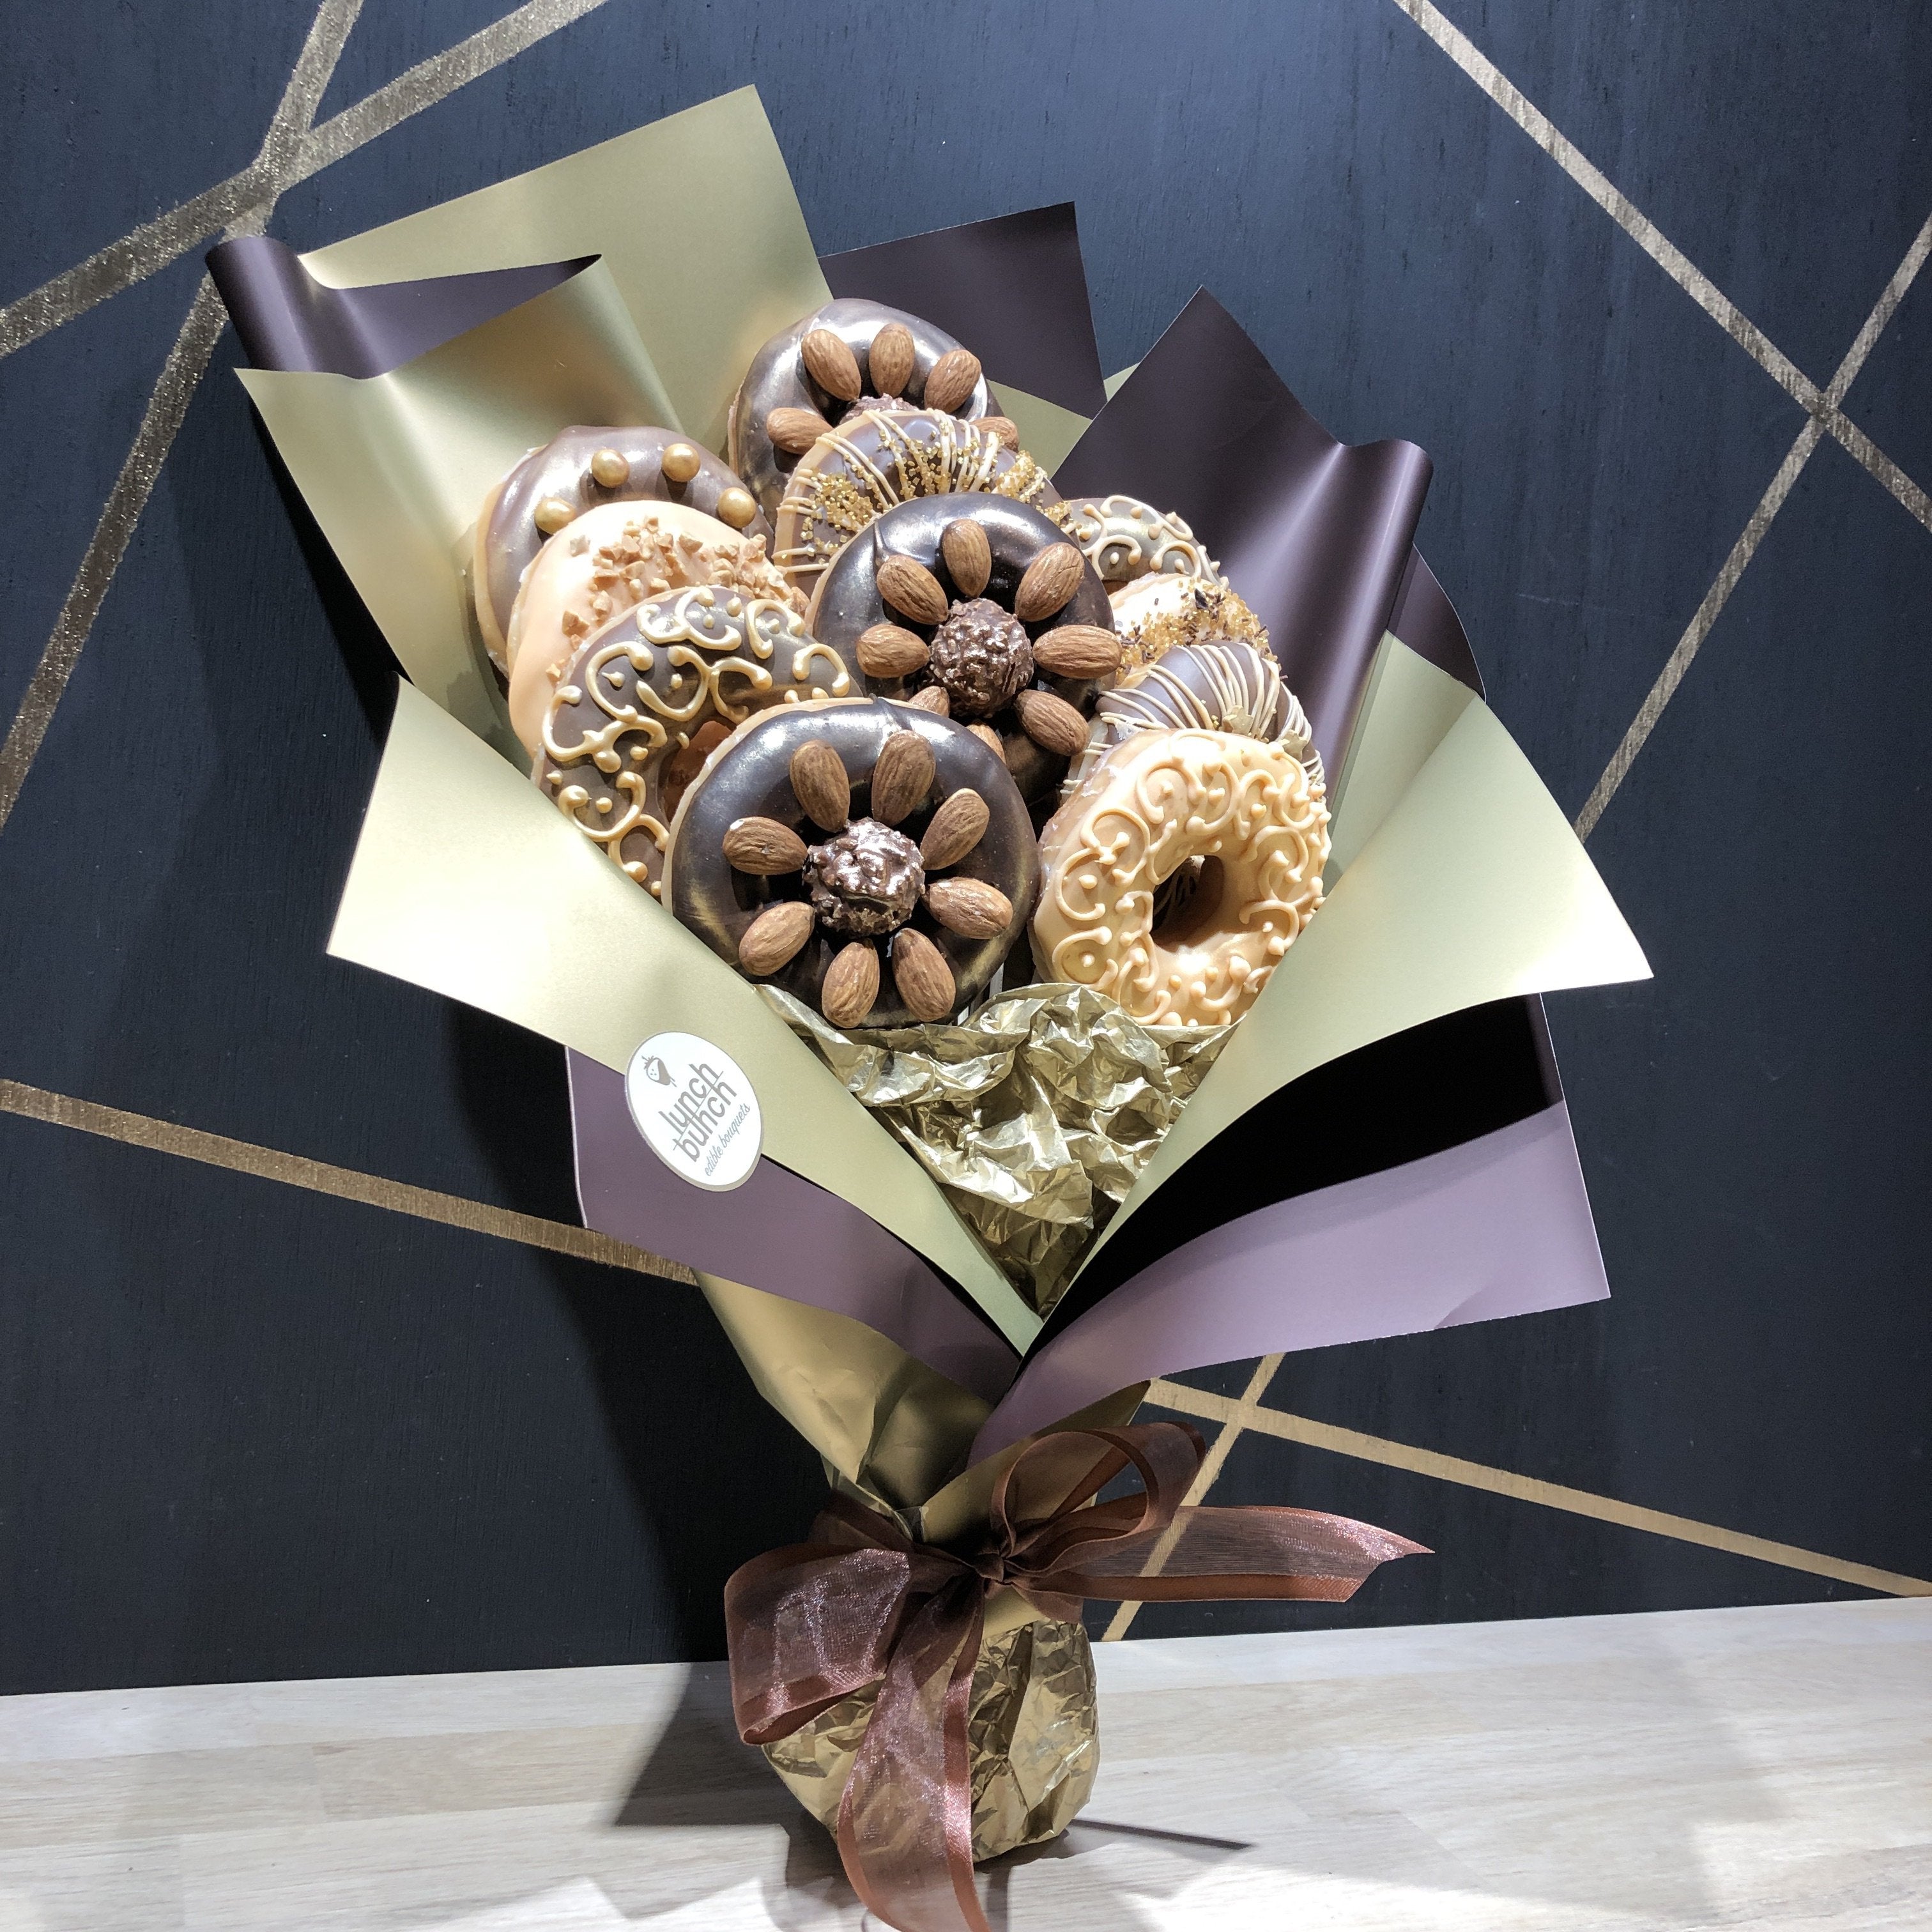 Handmade donut bouquet same day delivery Adelaide order online